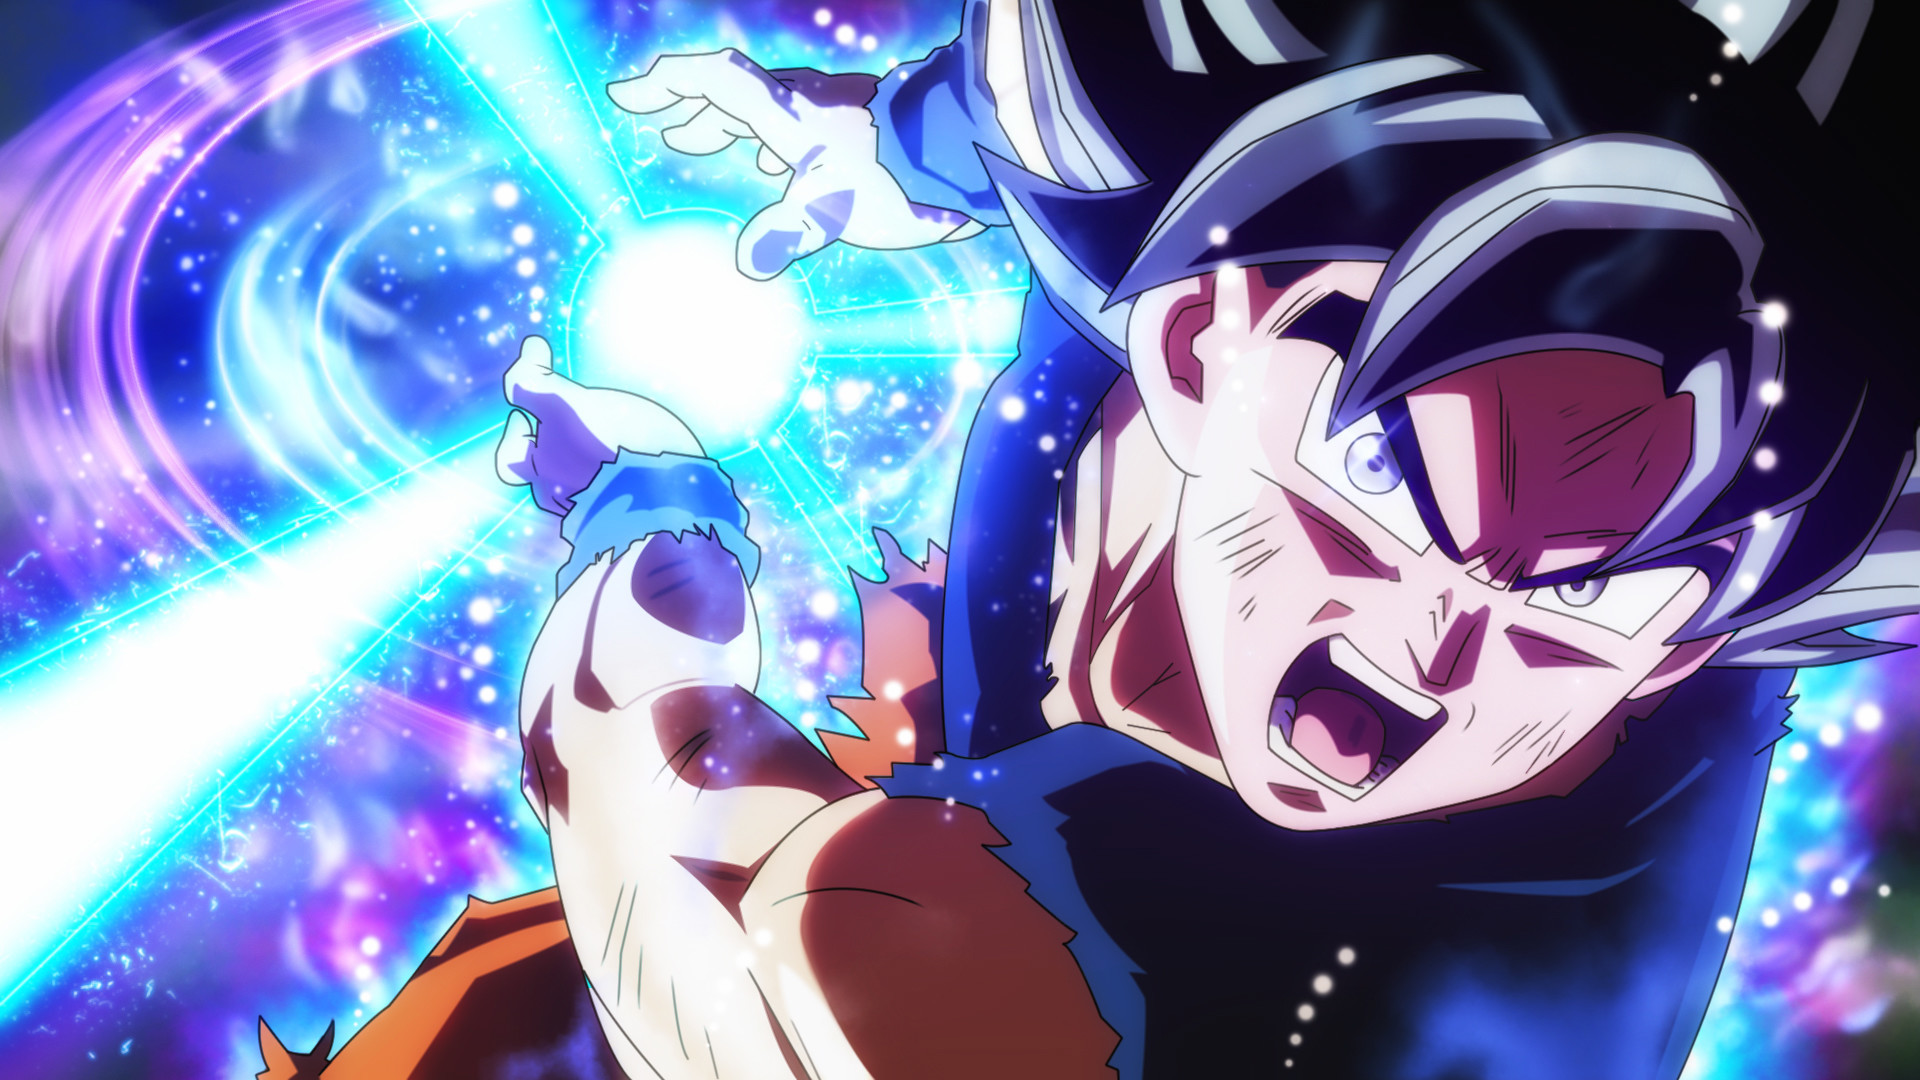 1920x1080 Dragon Ball Super Wallpaper [4k] by ThePi7on